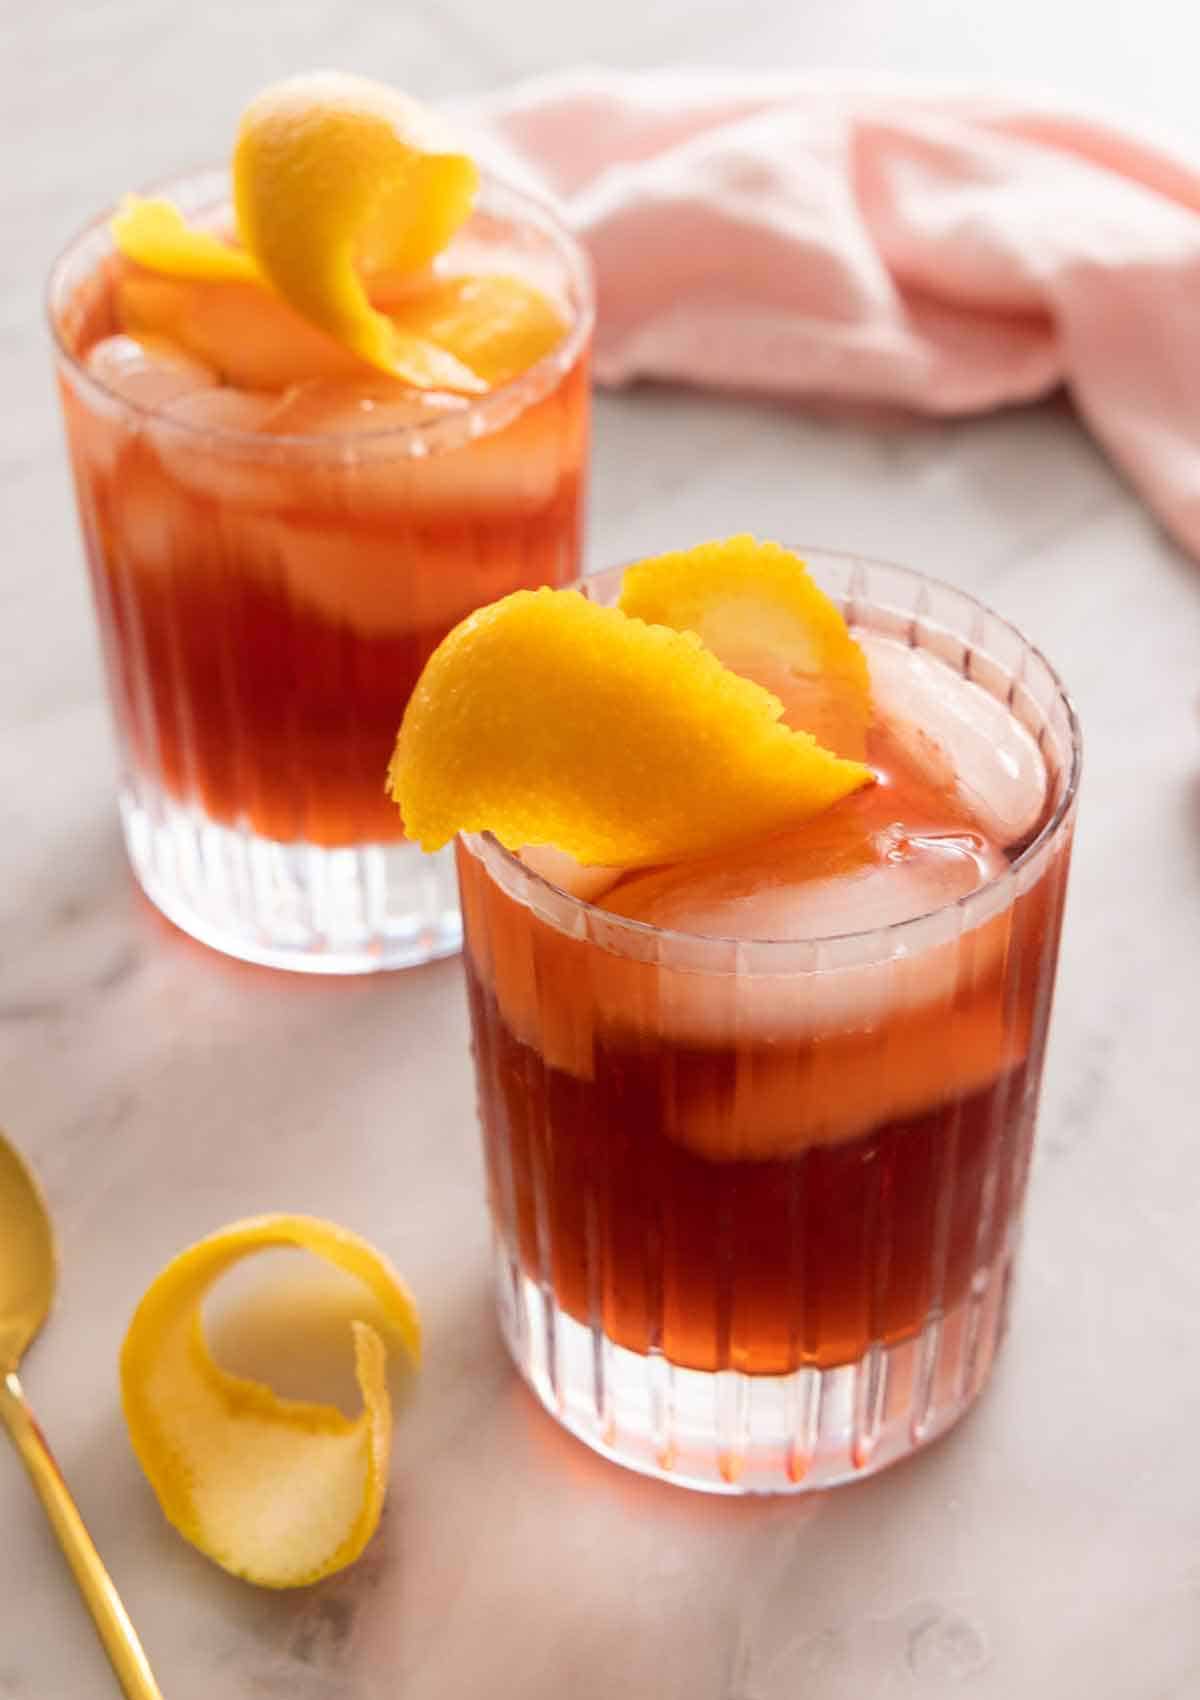 Two glasses of Negroni cocktails with orange peels as garnish.